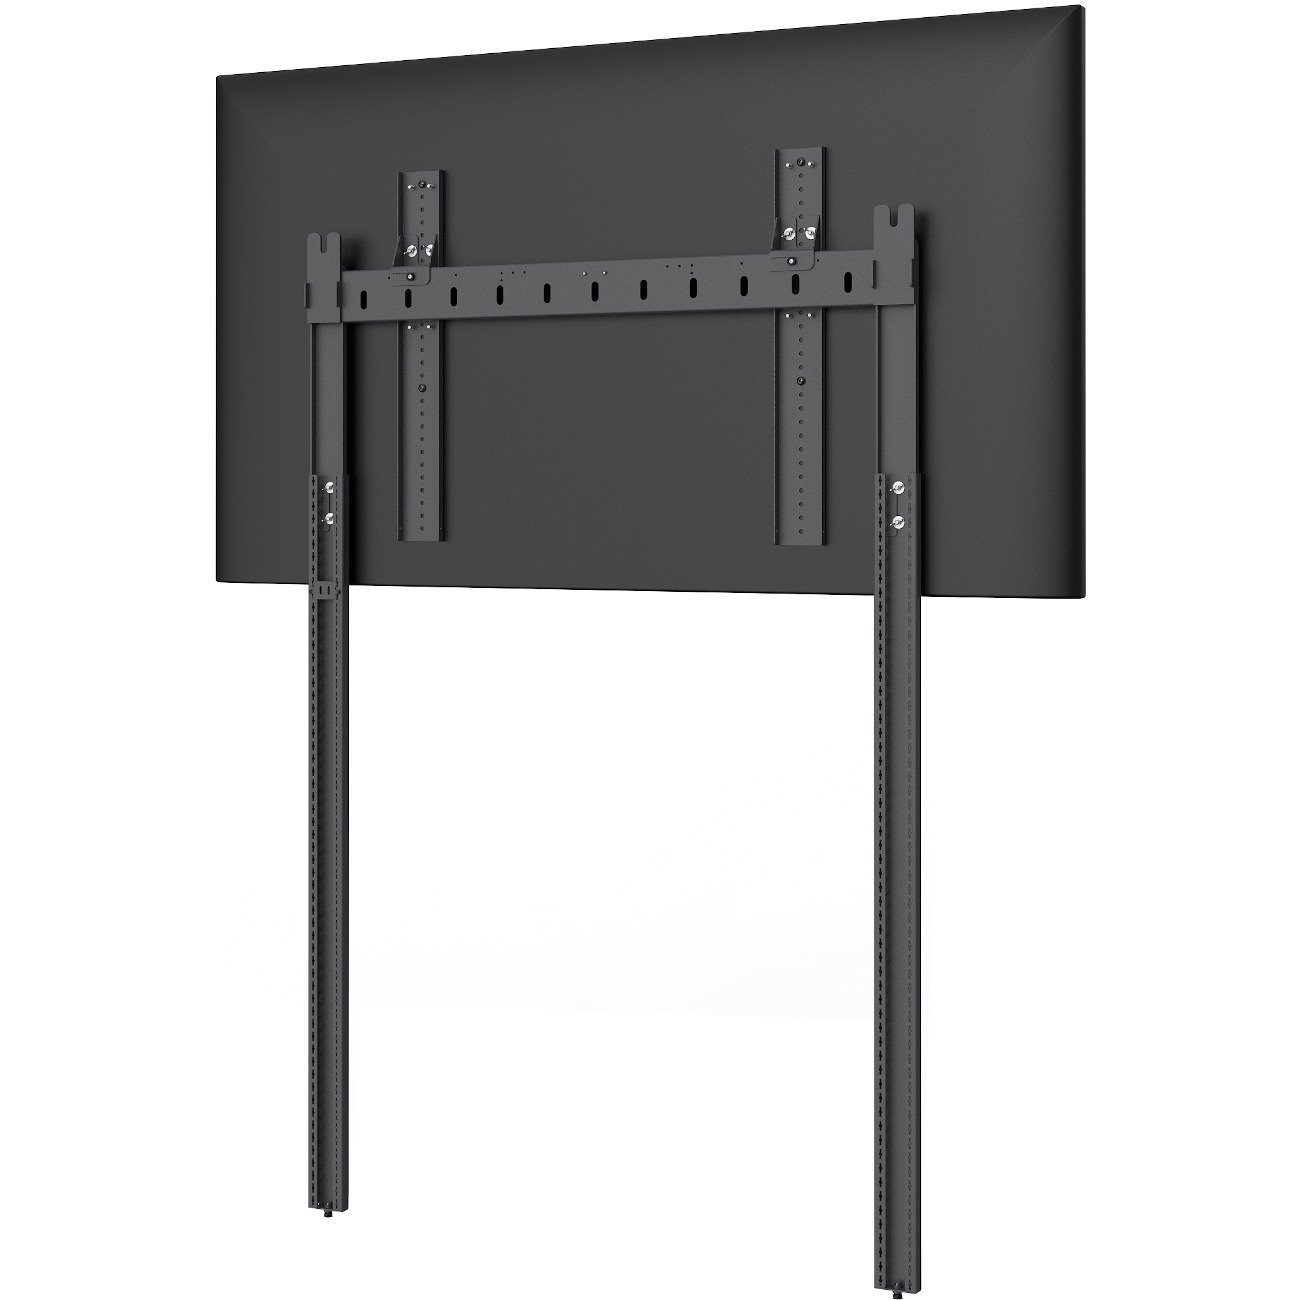 Heckler Design Wall Mount for Display, Video Conference Equipment - Black Gray